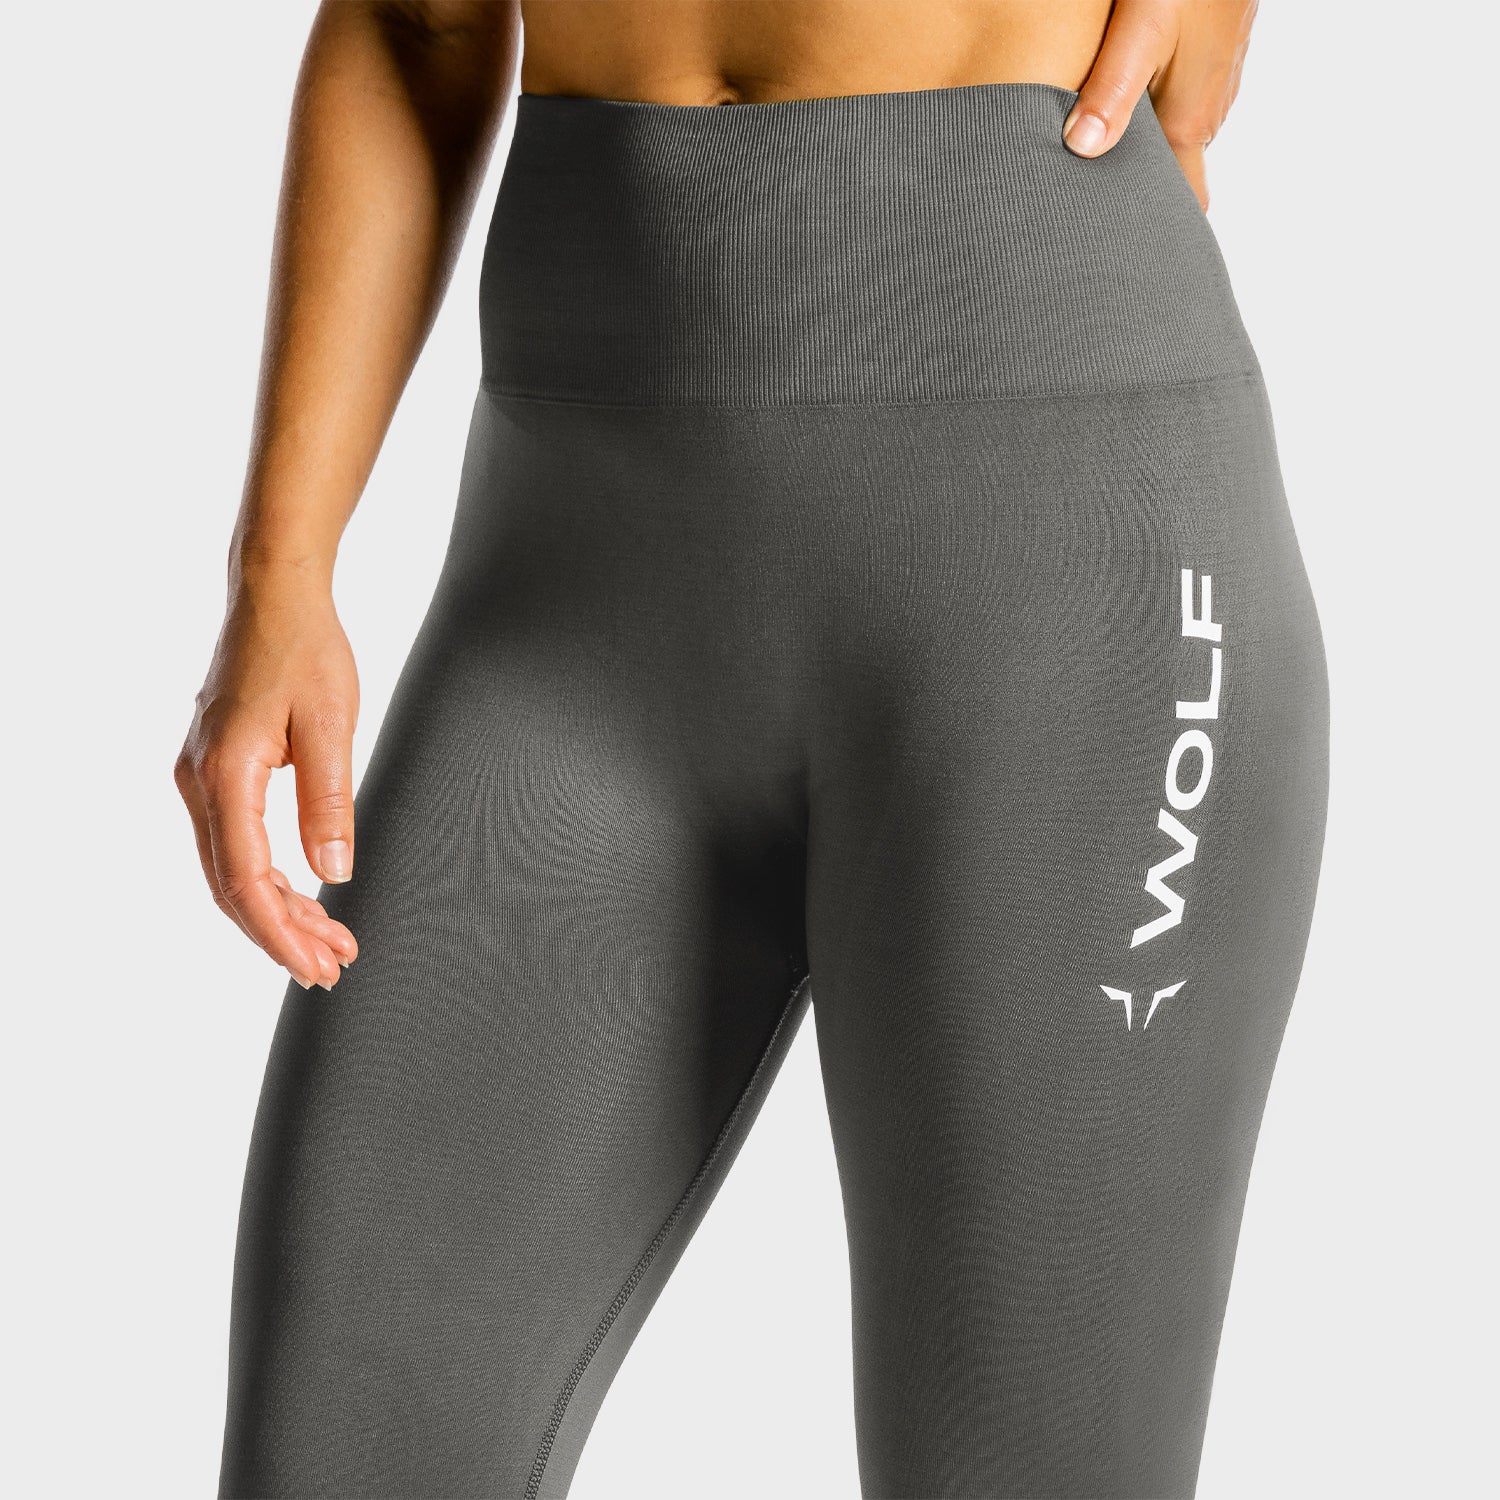 squatwolf-gym-leggings-for-women-primal-leggings-charcoal-workout-clothes